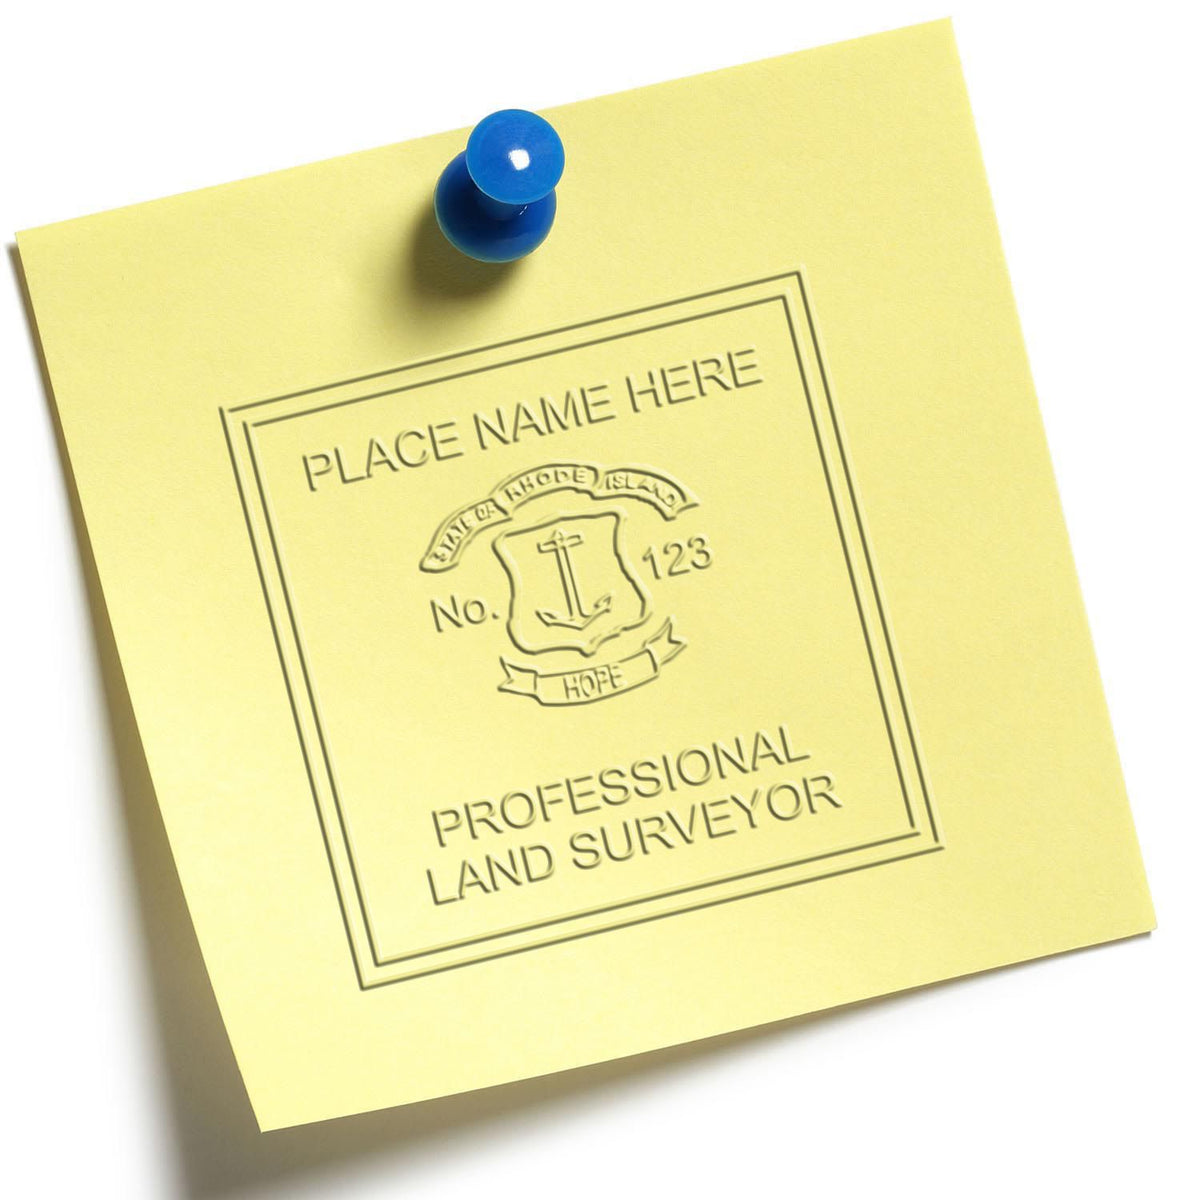 An in use photo of the Gift Rhode Island Land Surveyor Seal showing a sample imprint on a cardstock